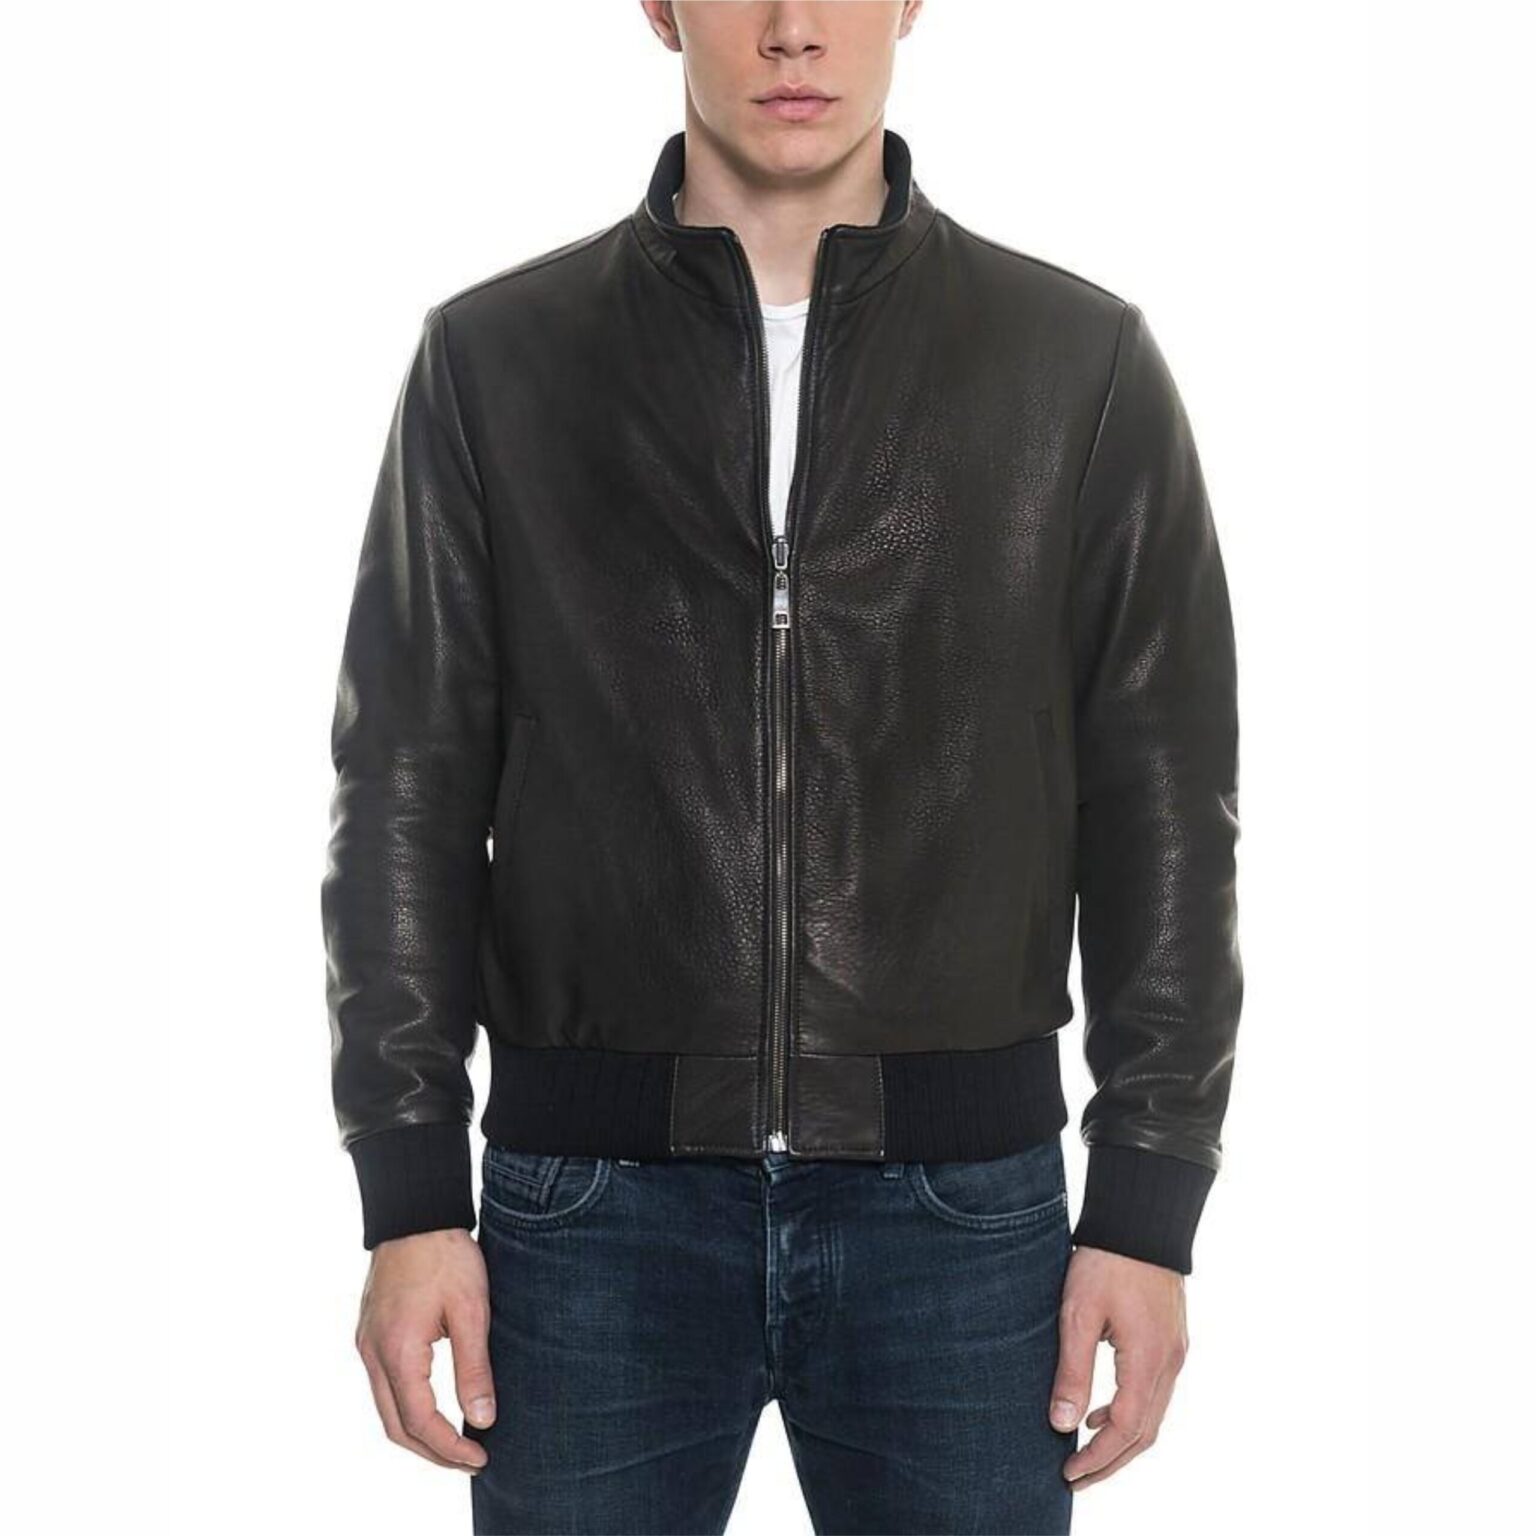 Best black leather jacket | Cheap real leathers jackets for men